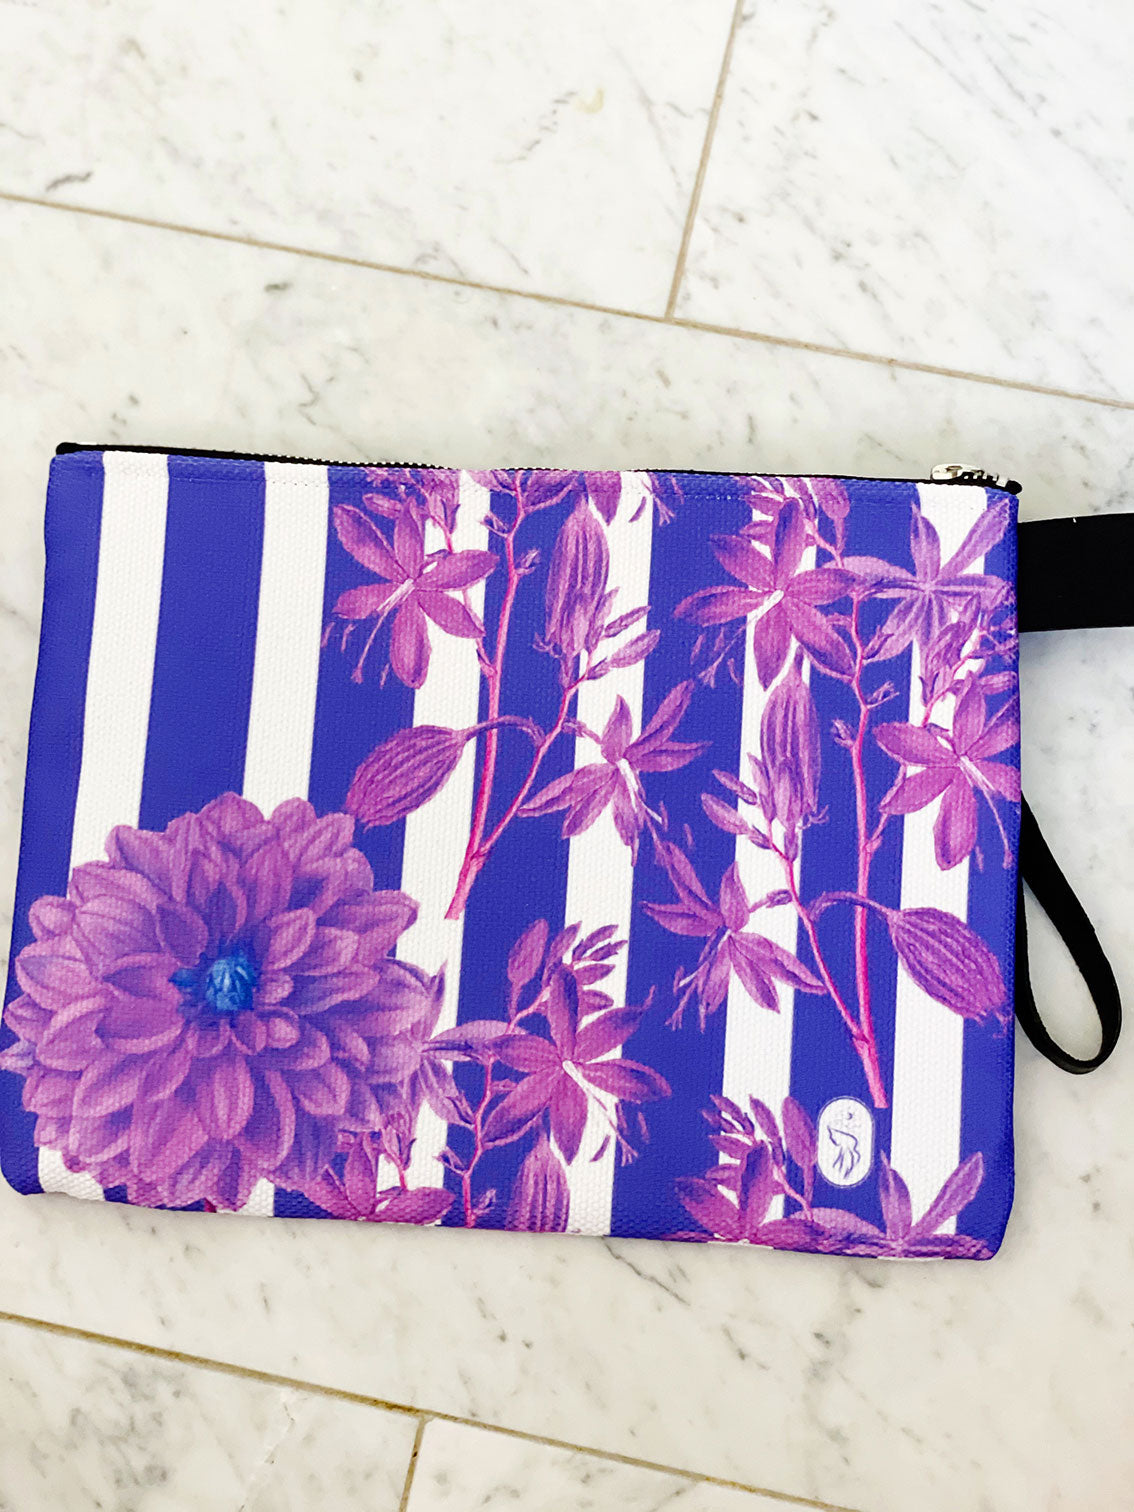 purple stripes and florals adorn this luxe zipper pouch